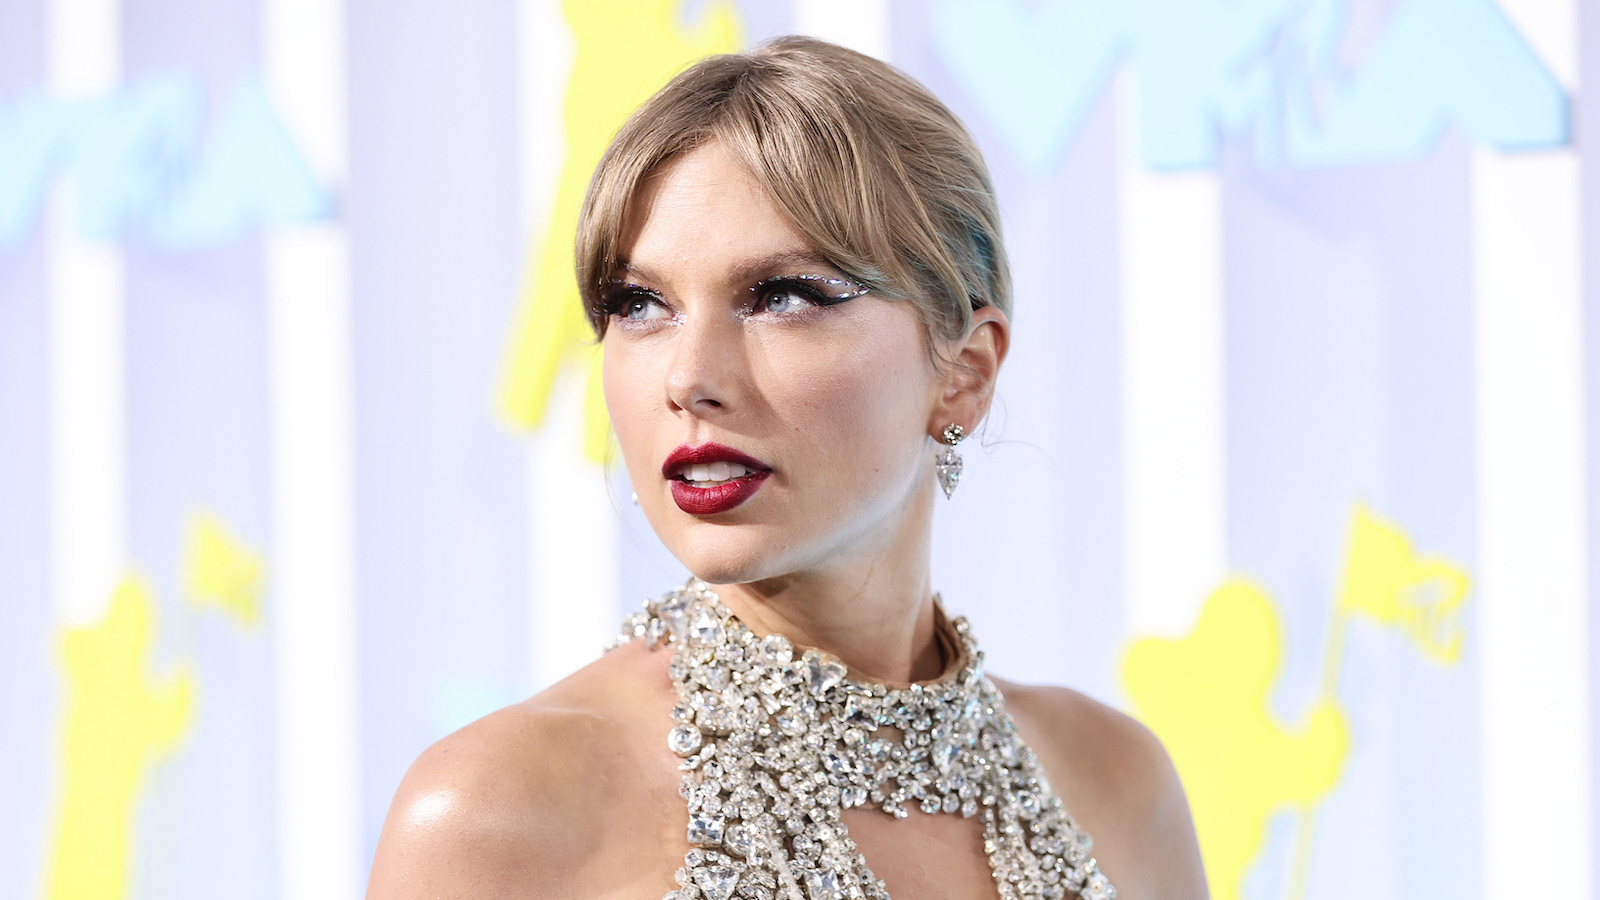 When is Taylor Swift's New Album Coming Out? 'Midnights' Release Date